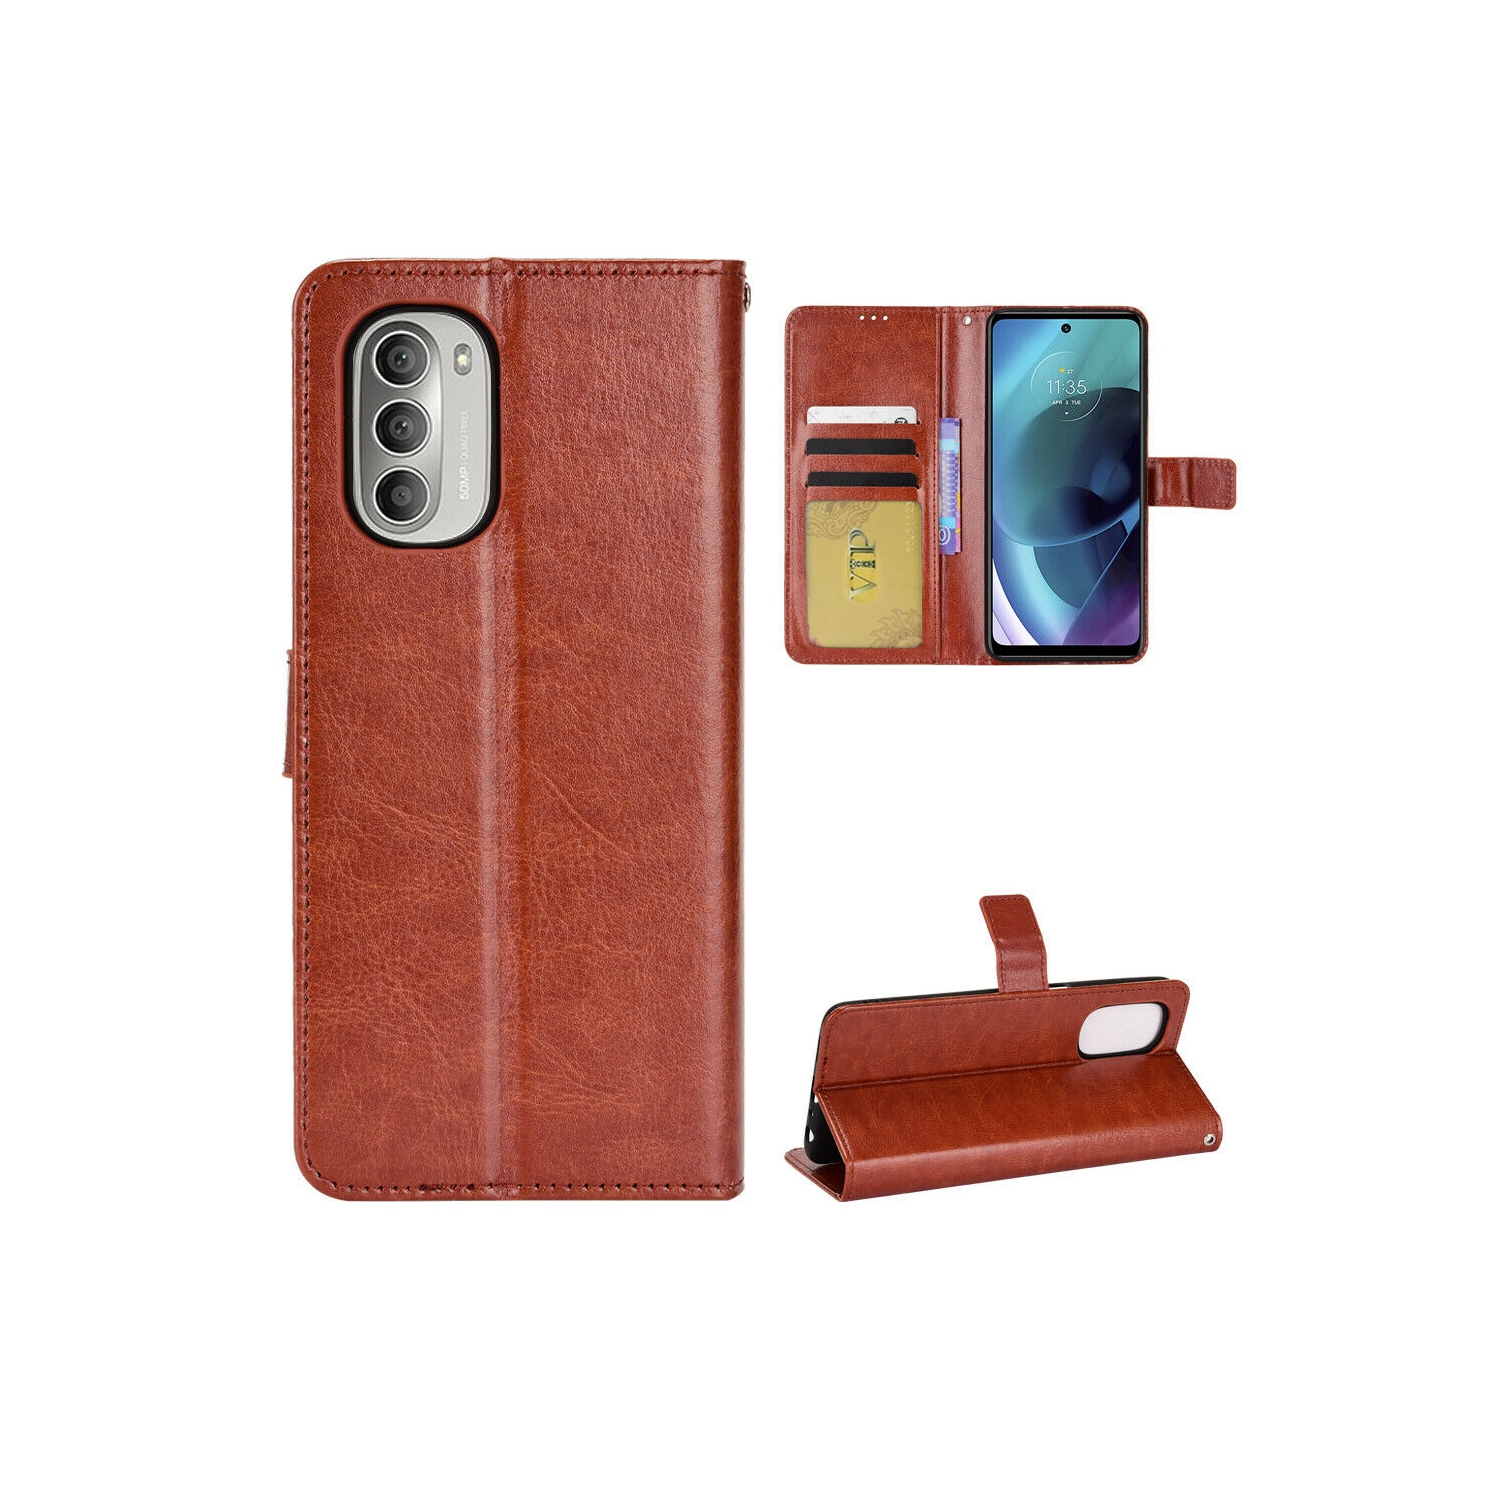 [CS] Motorola Moto G Stylus 5G 2022 Case, Magnetic Leather Folio Wallet Flip Case Cover with Card Slot, Brown